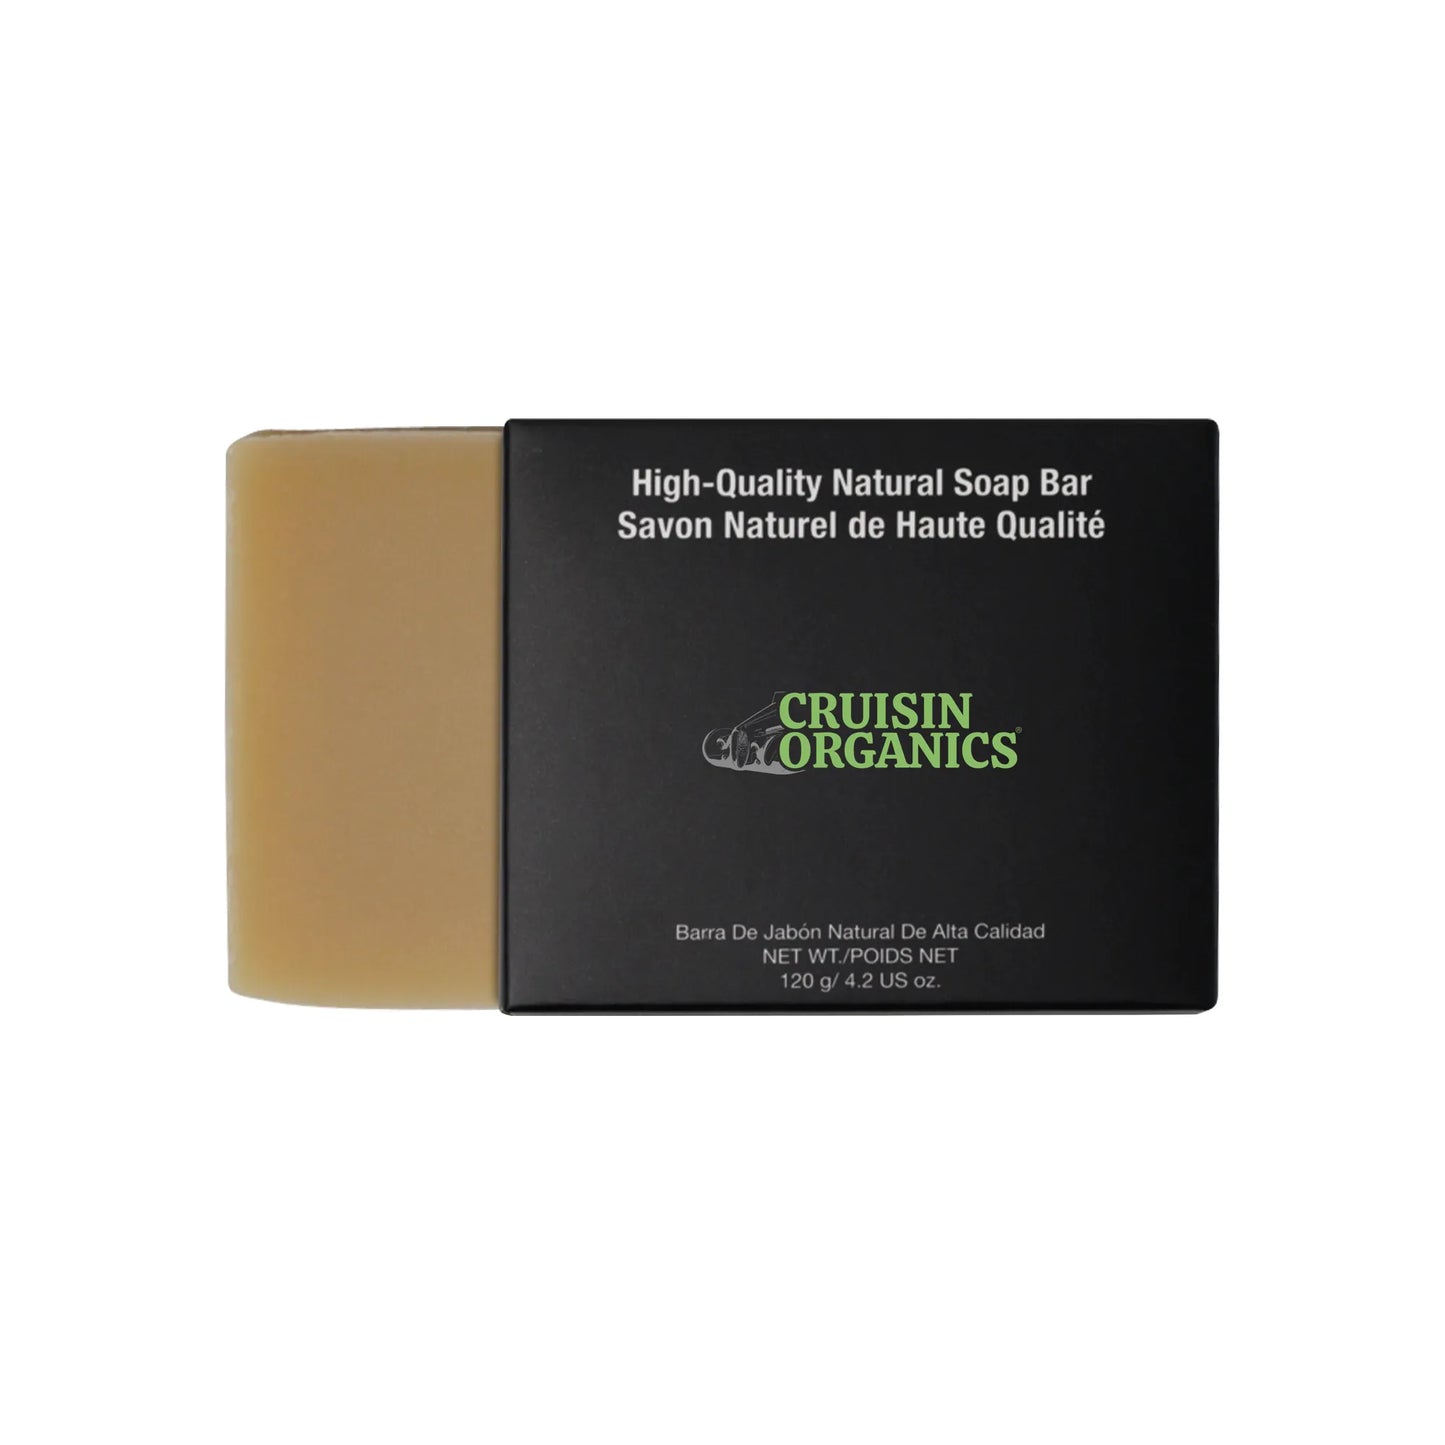 Benefits of rose and honey with our Cruisin Organics Honey Rose Soap. Infused with rosehip extracts and geranium essential oil, this soap helps reveal a youthful complexion while also evening out skin tone. speeds healing and reduces inflammation. 